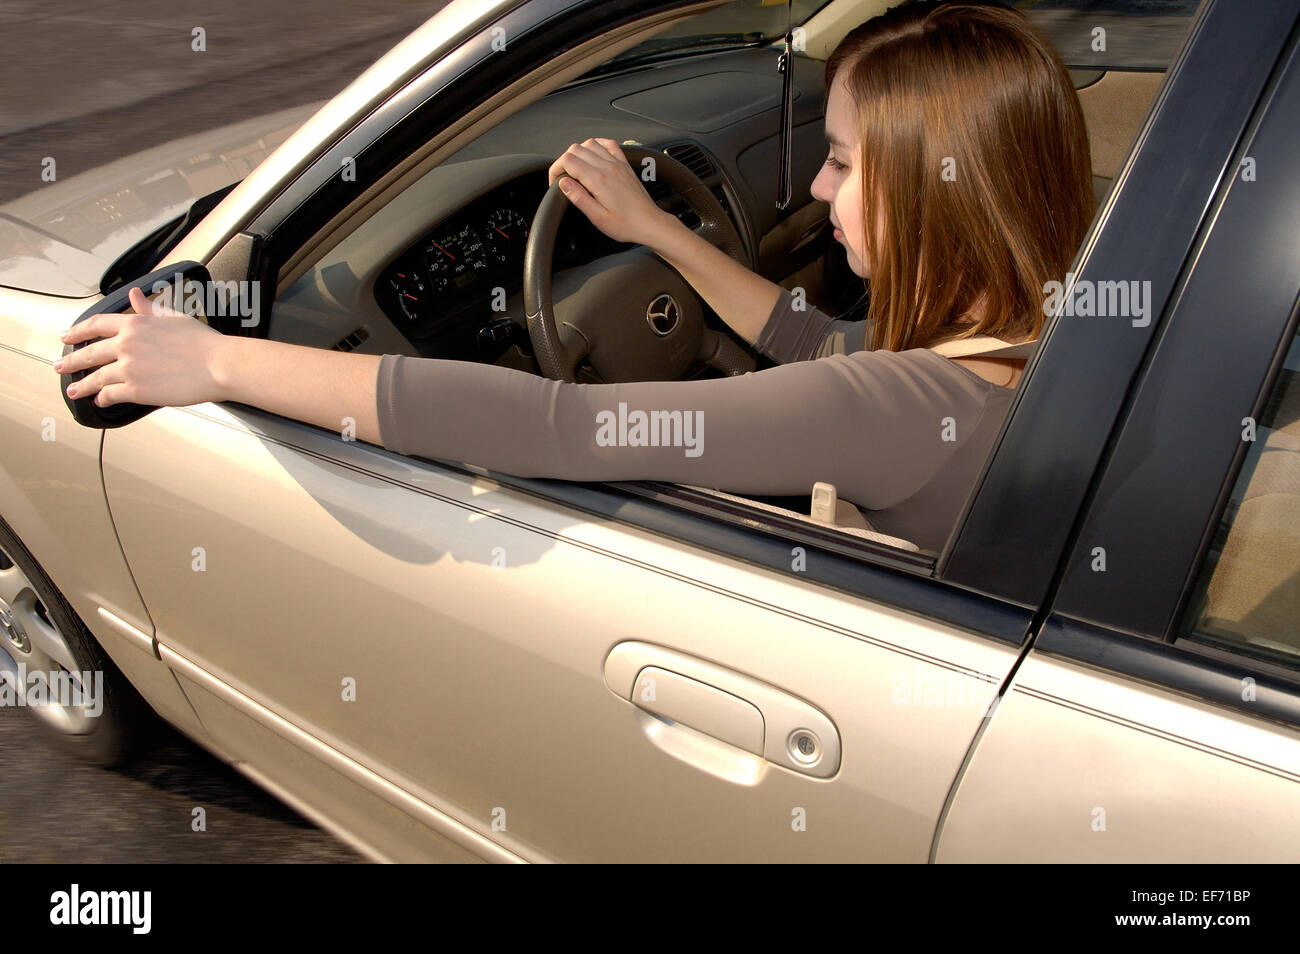 Teenage driver behind the wheel of a car, adjusting the rear view mirror. Stock Photo